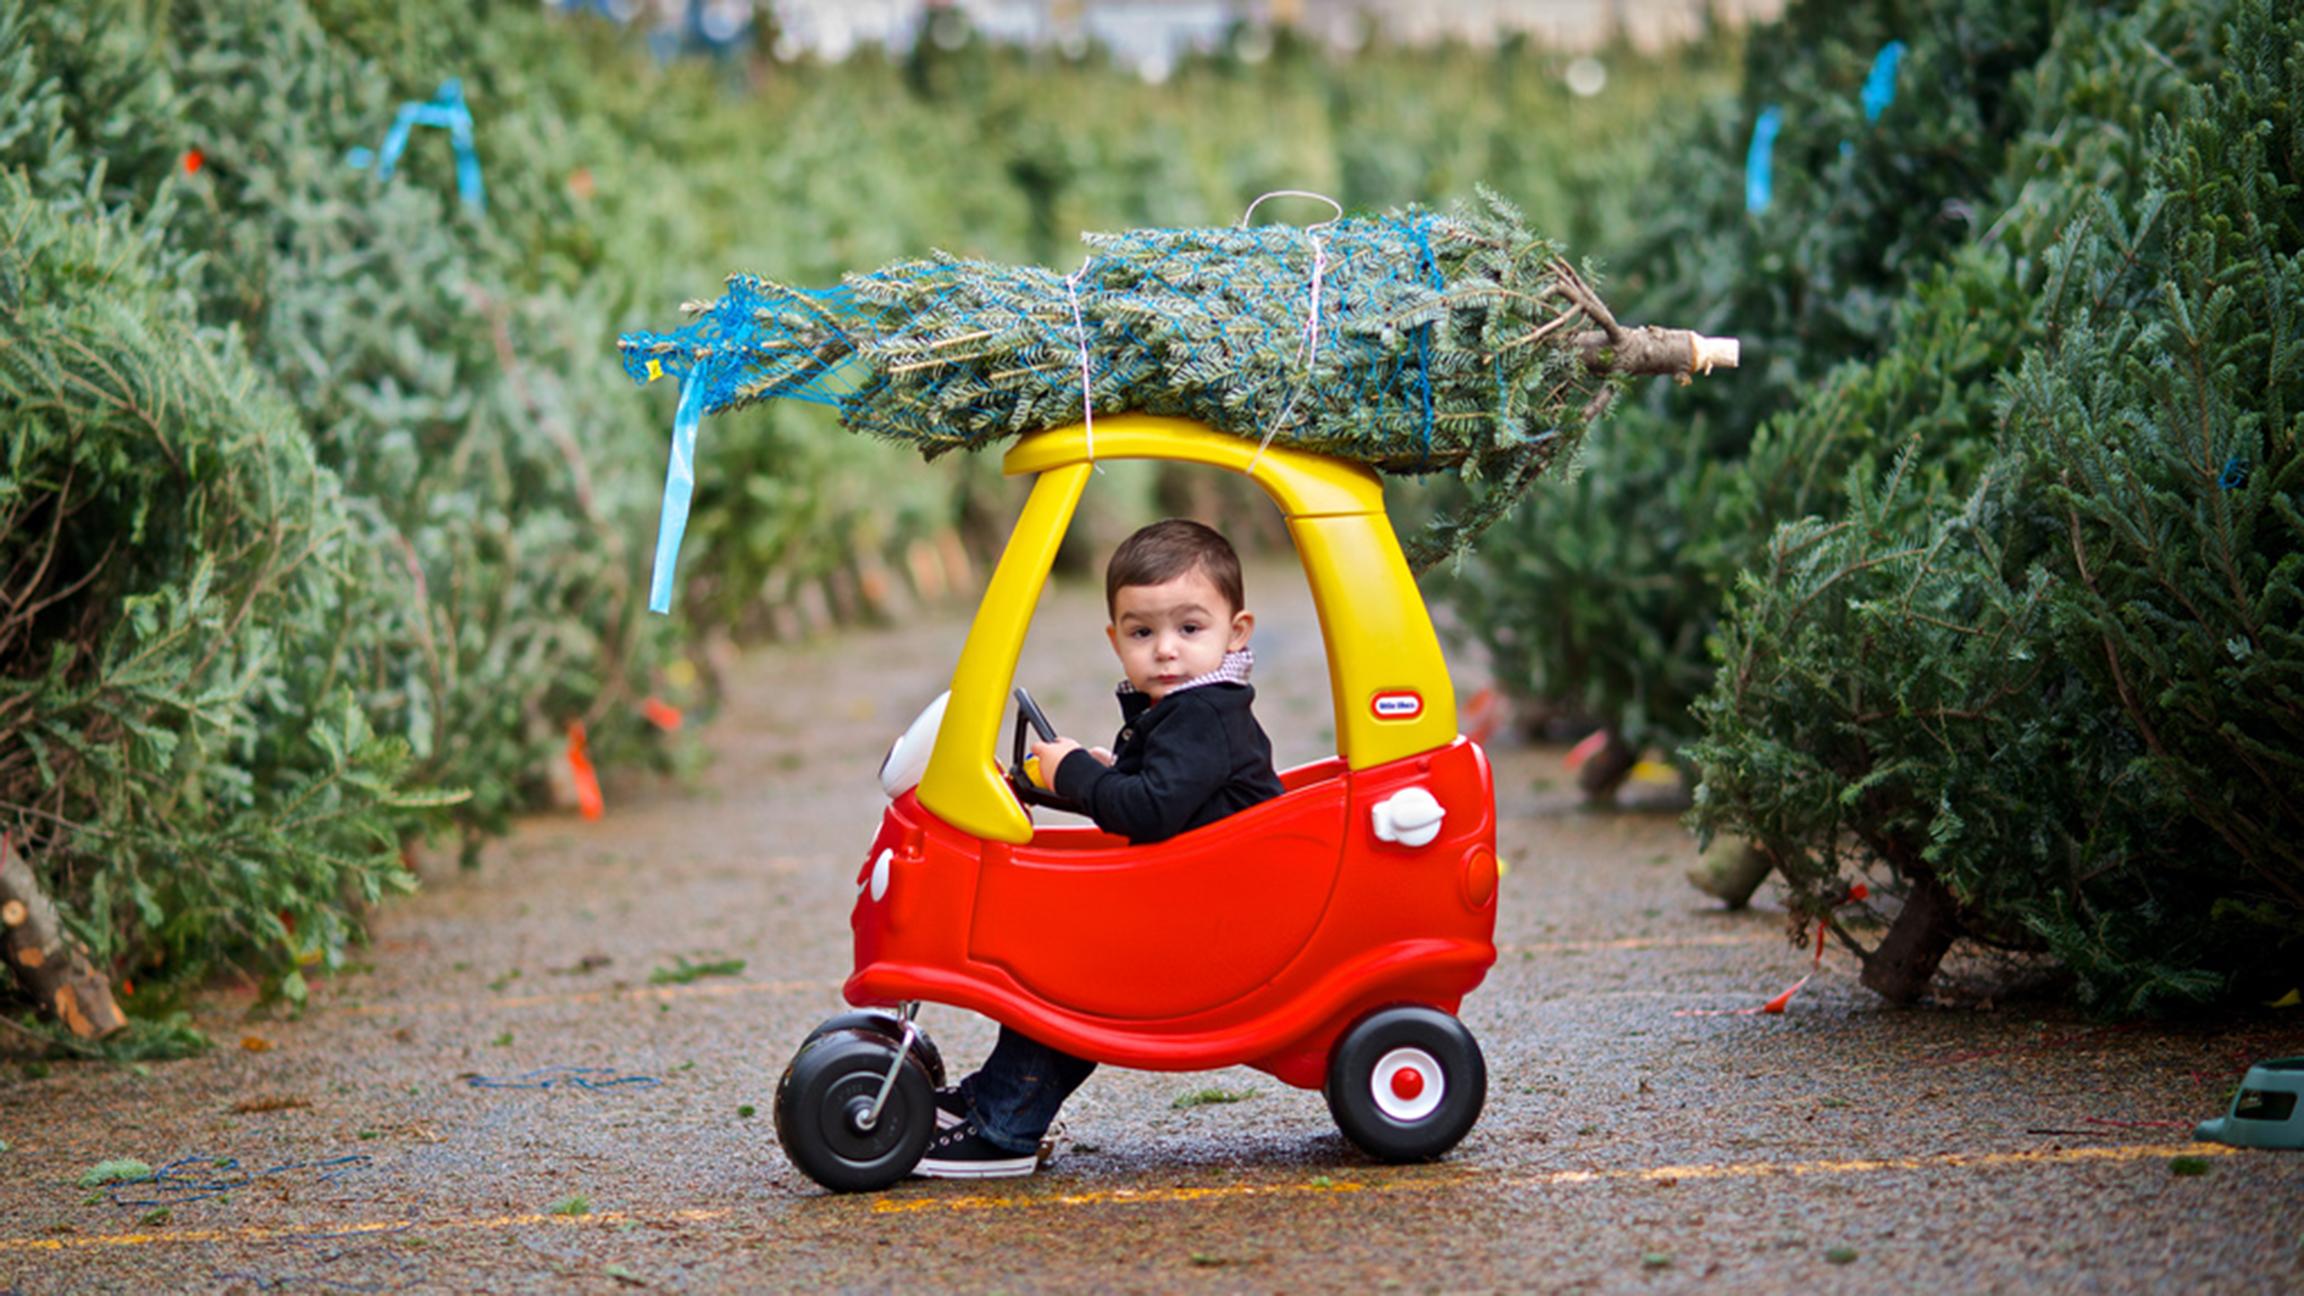 Road trip: Browse trees by the dozen at a Christmas tree farm in DeKalb. (FrankGuido / Flickr)